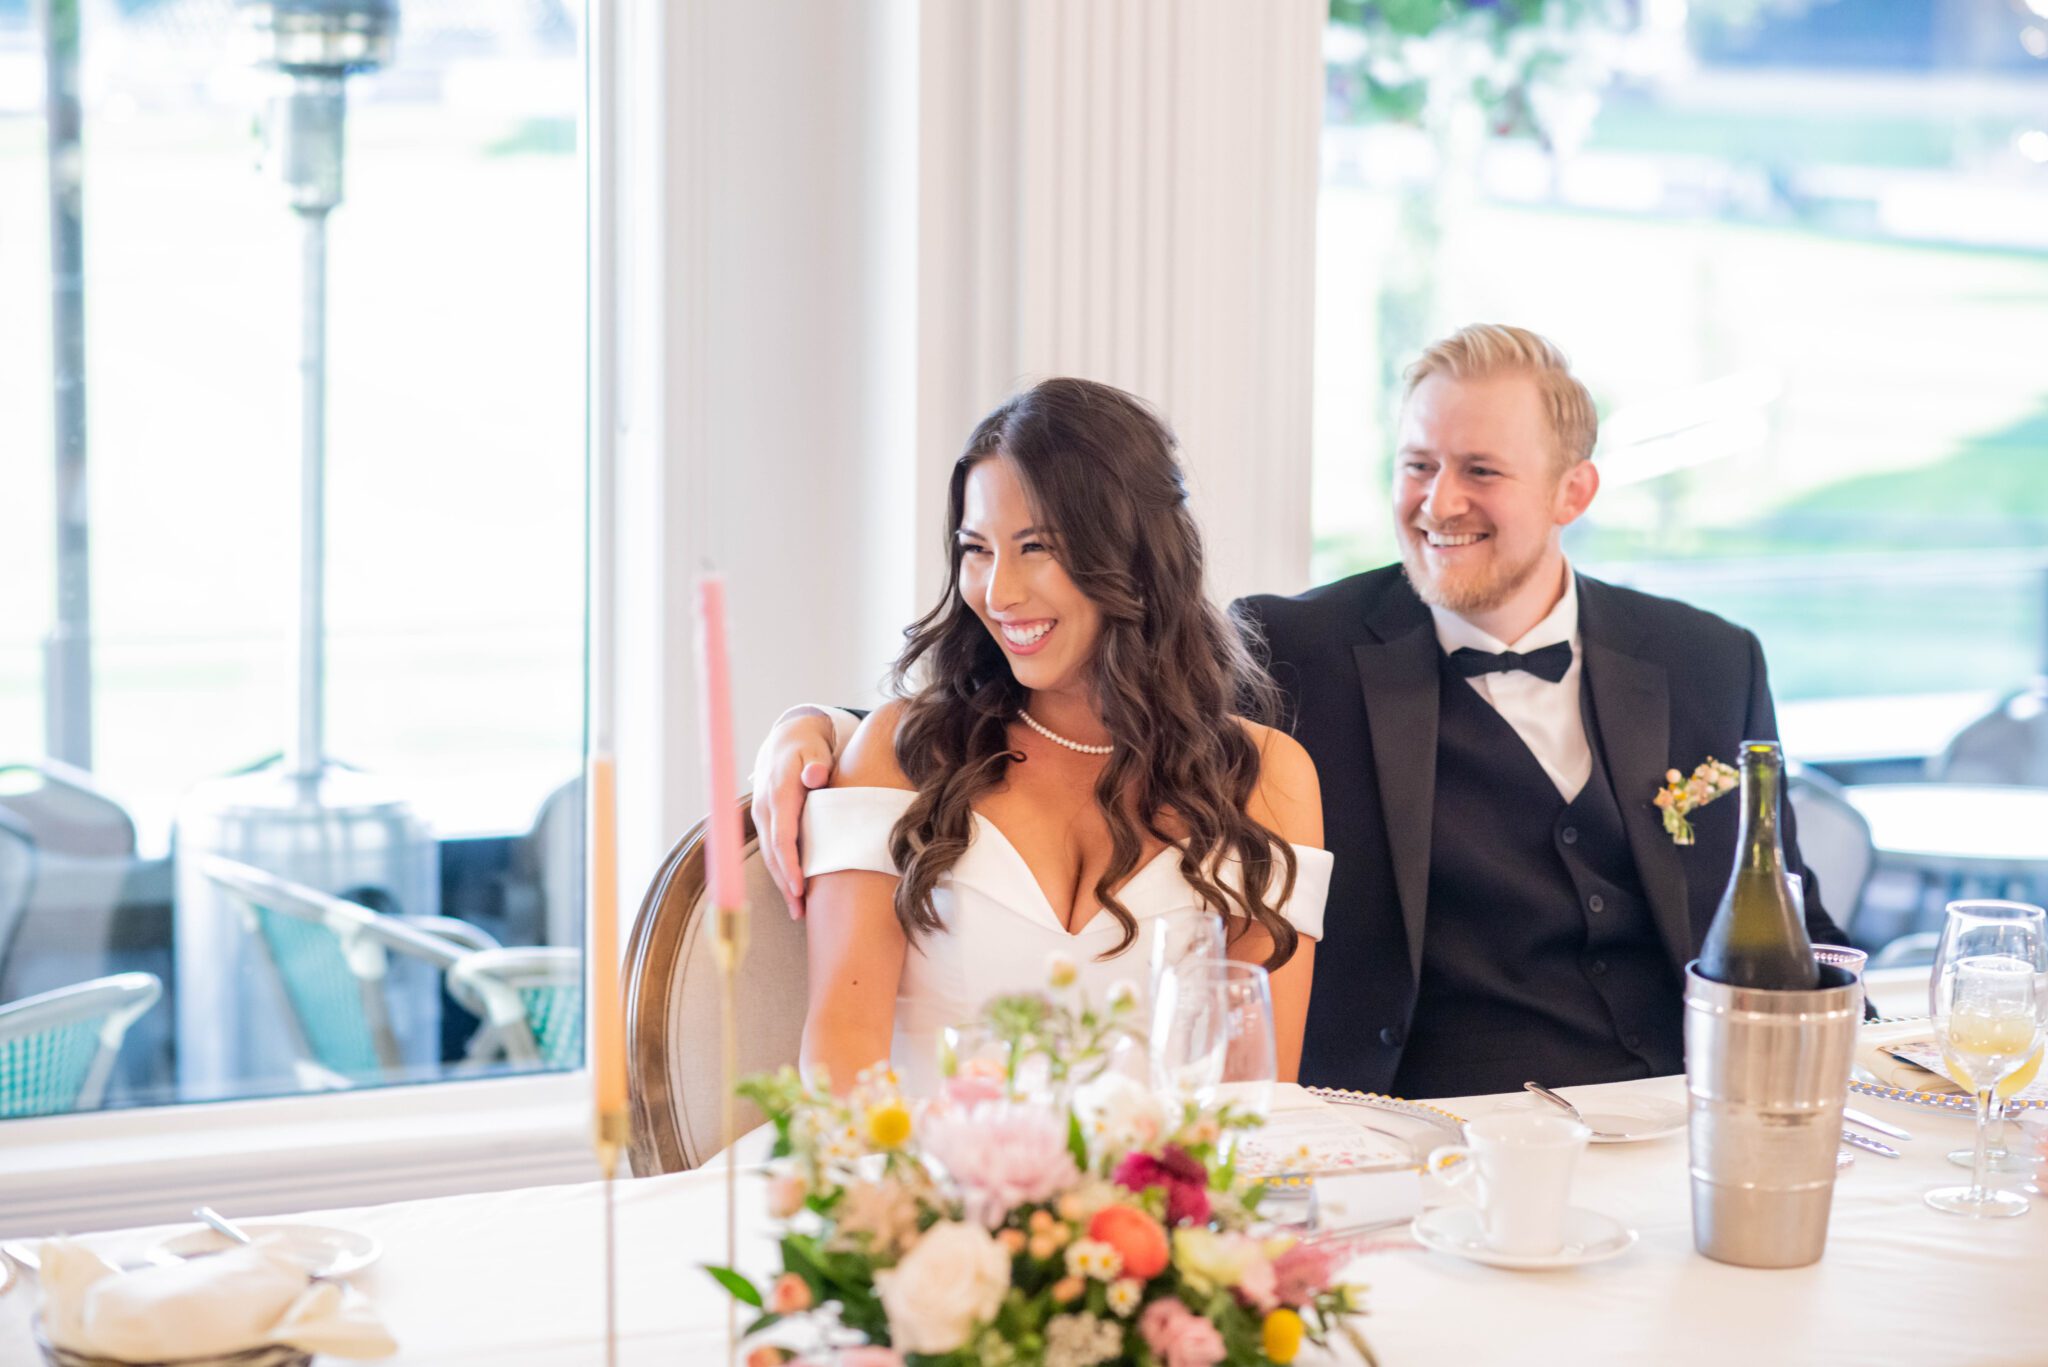 Couple smiling during wedding speeches at their whimsical garden wedding at Spruce Meadows. 